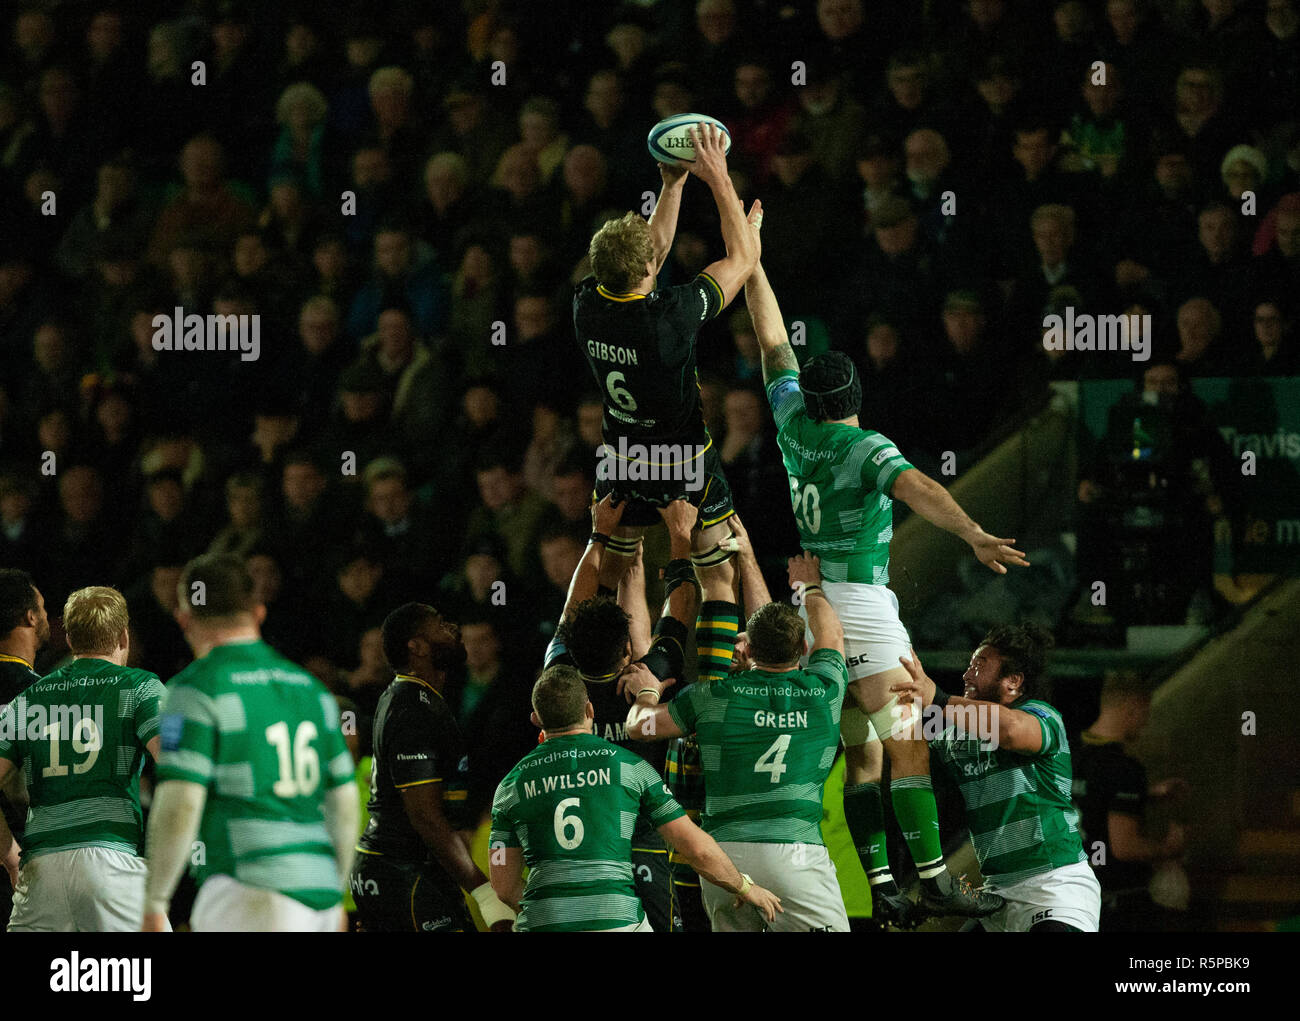 Northampton, UK. 1st December 2018. Jamie Gibson of Northampton Saints wins the line out ball during the Gallagher Premiership Rugby match between Northampton Saints and Newcastle Falcons. Andrew Taylor/Alamy Live News Stock Photo